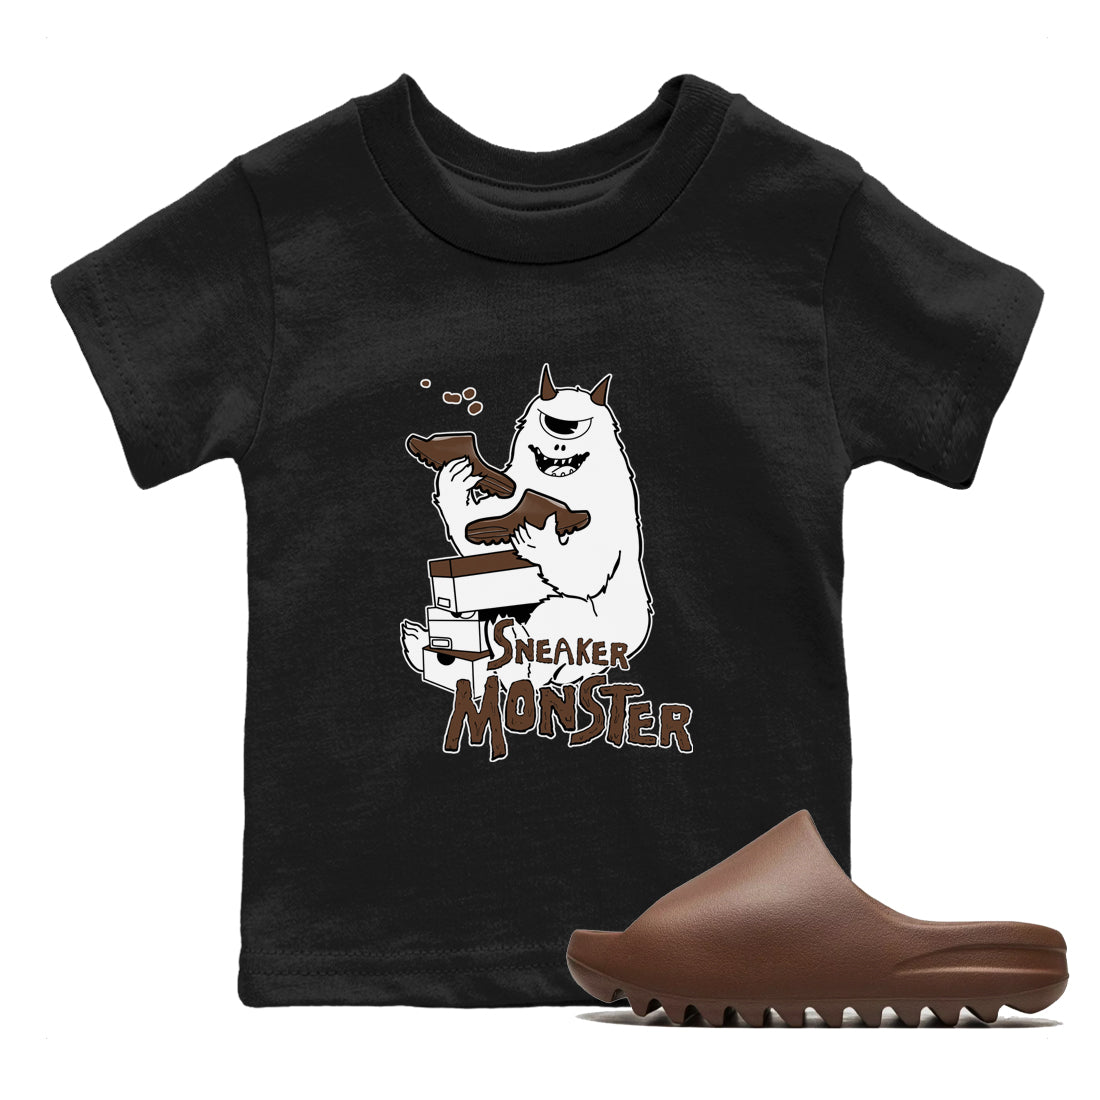 Yeezy Slide Flax shirts to match jordans Sneaker Monster sneaker match tees Yeezy Slide Flax SNRT Sneaker Tees streetwear brand Baby and Youth Black 1 cotton tee